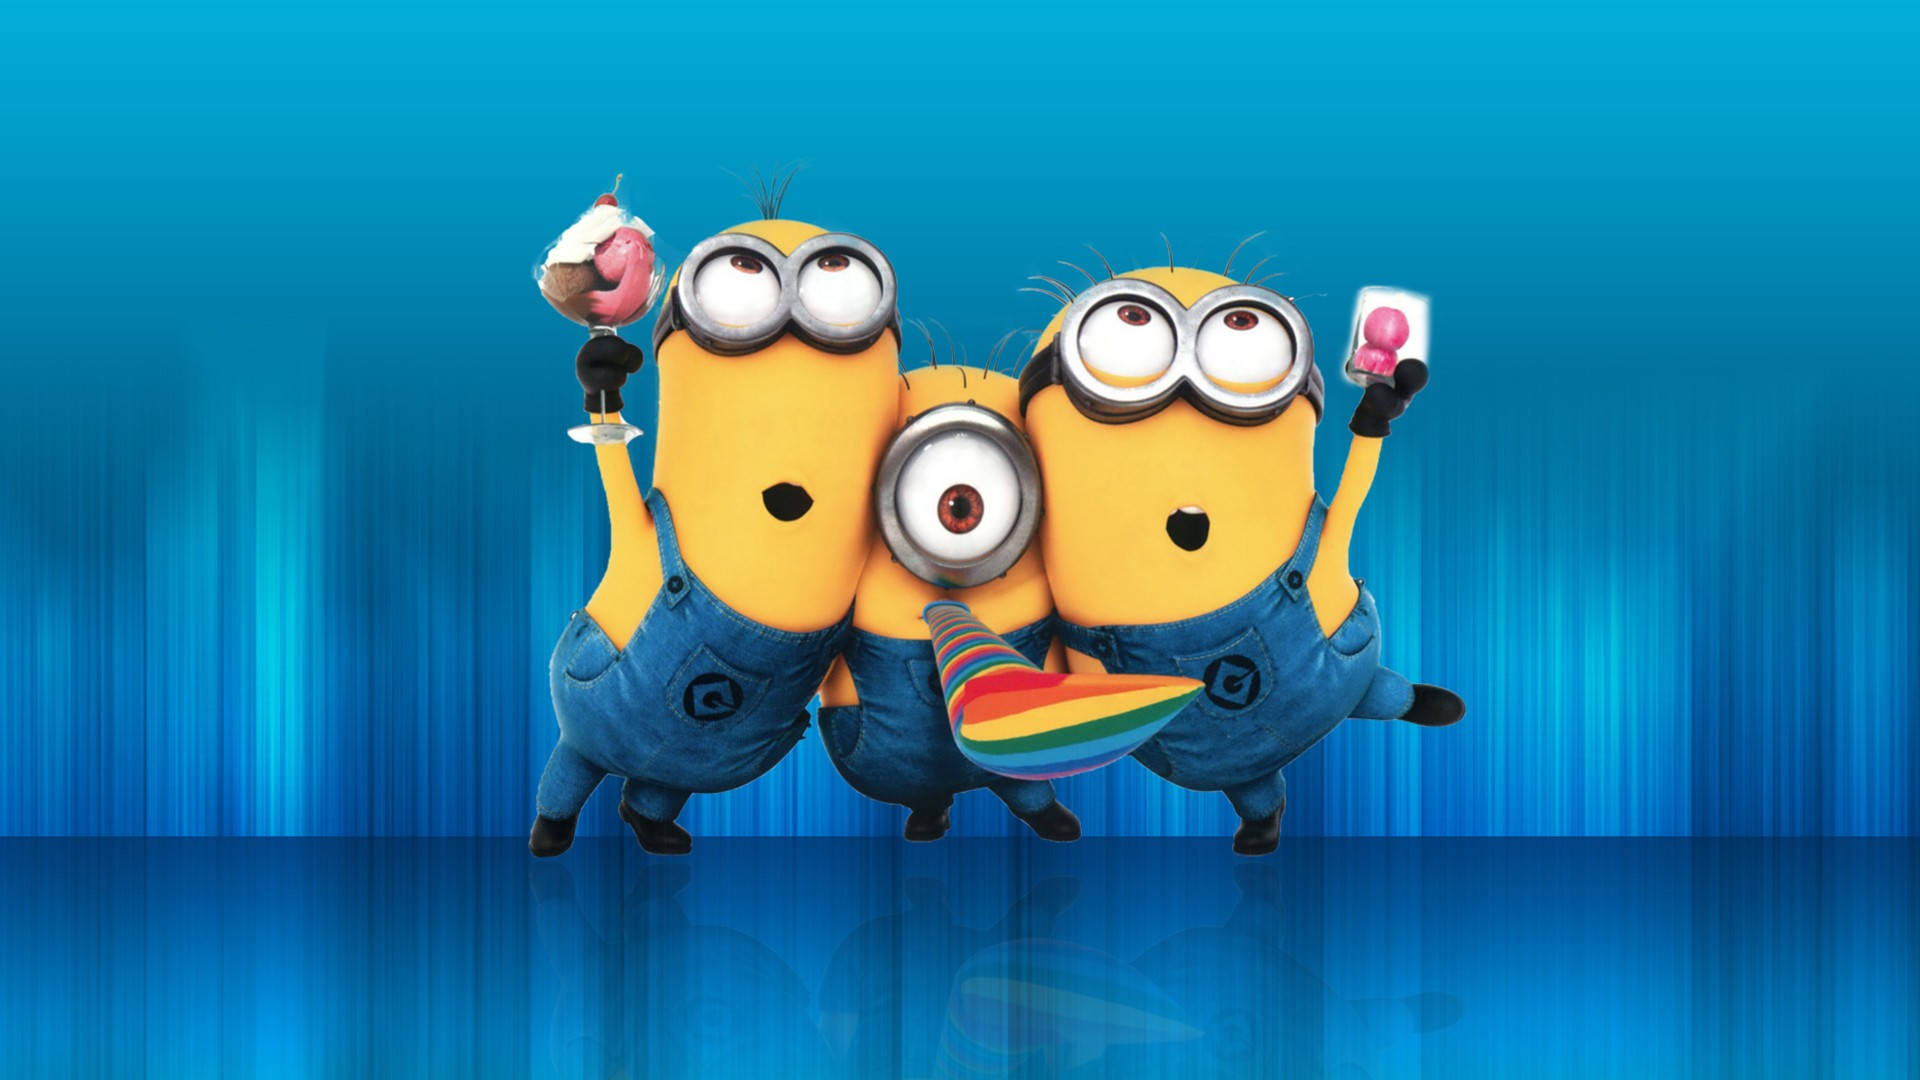 Minions Celebrating Together